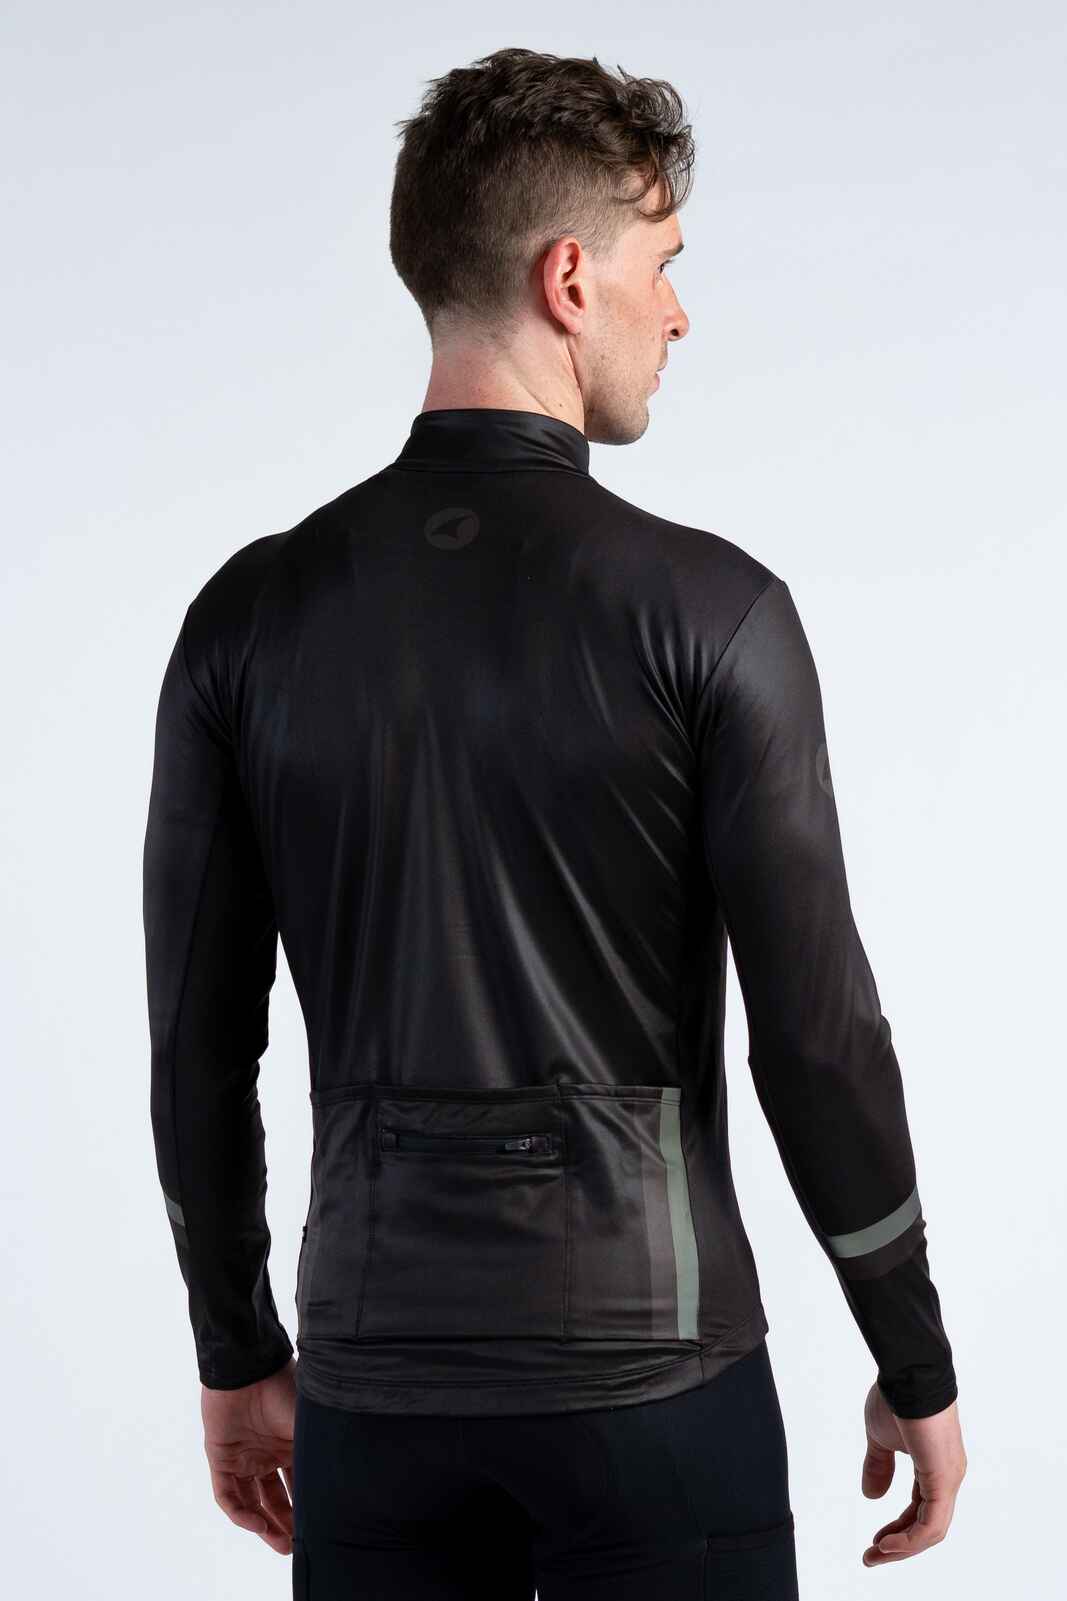 Men's Black Thermal Cycling Jersey - Back View